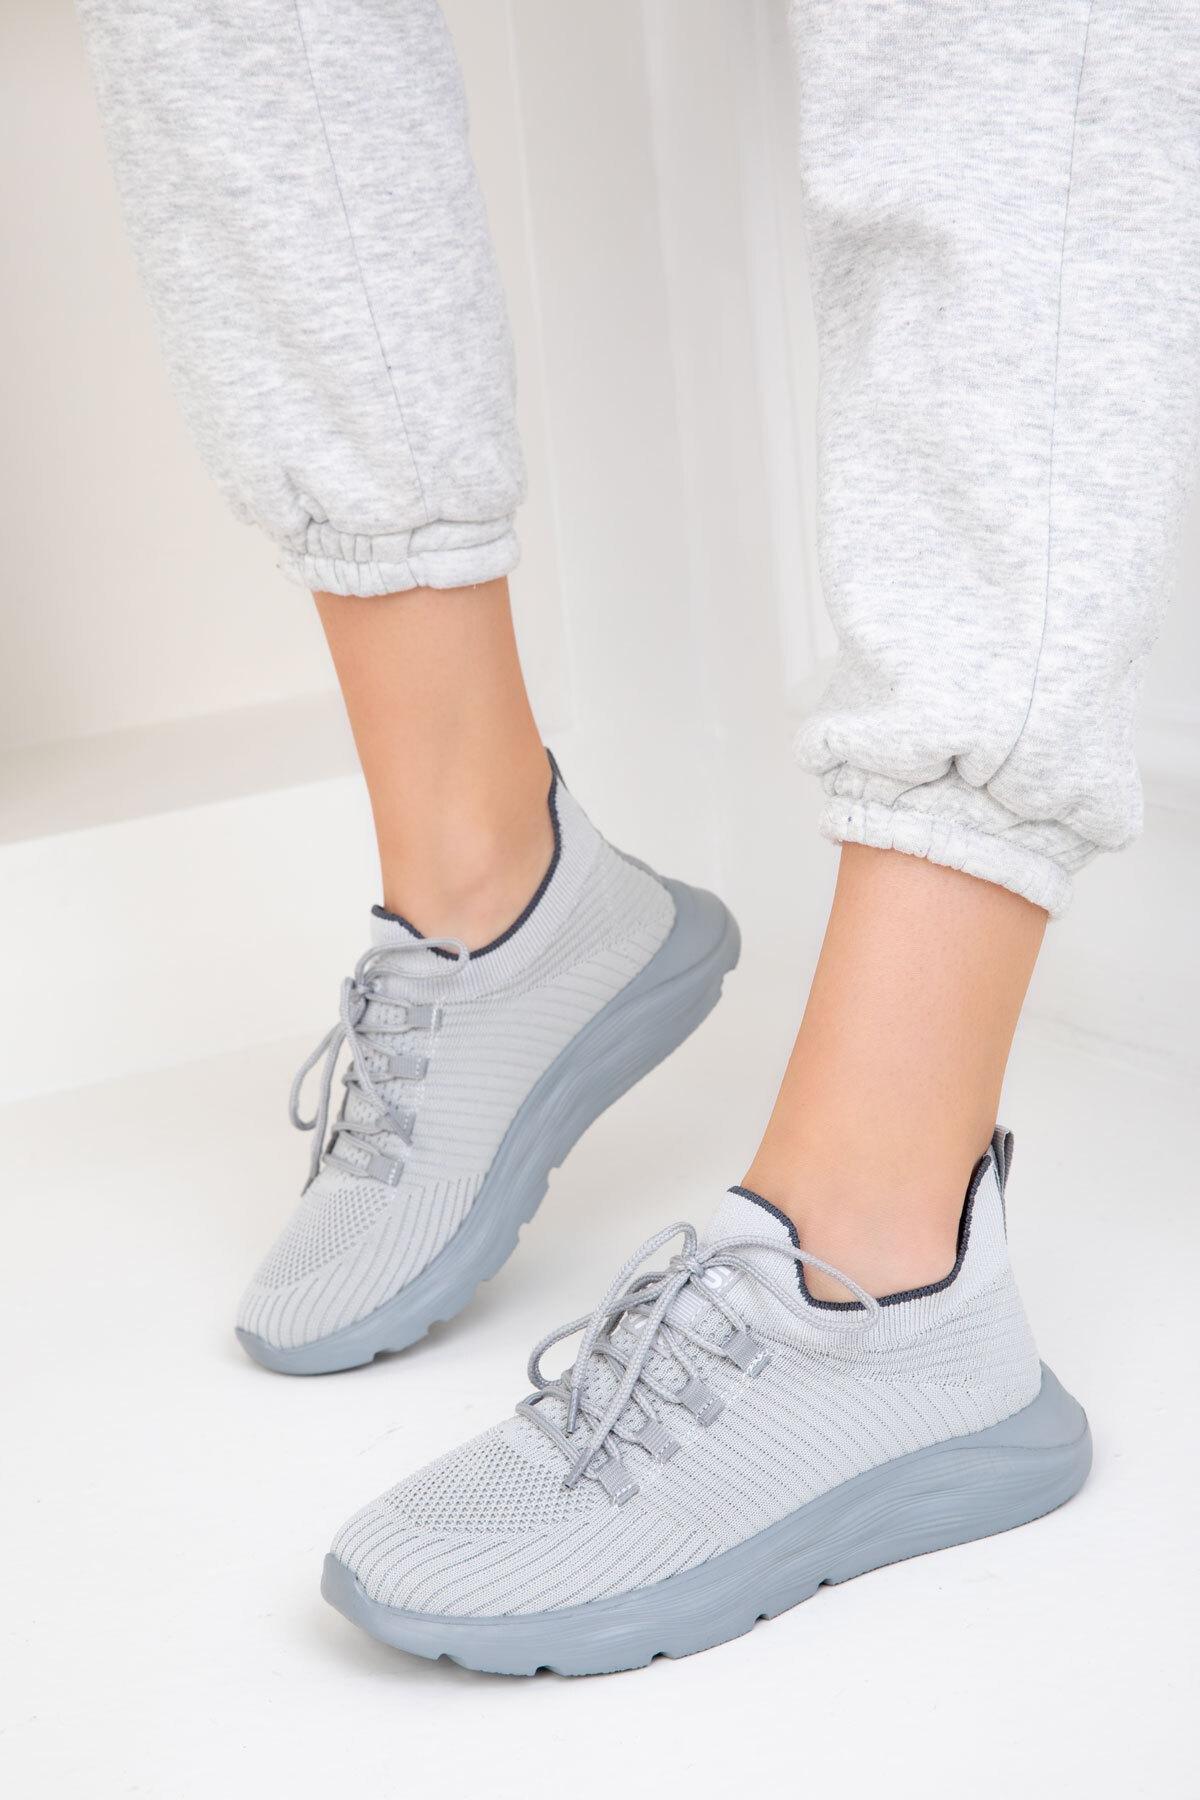 SOHO - Blue Lace-Up Sneakers